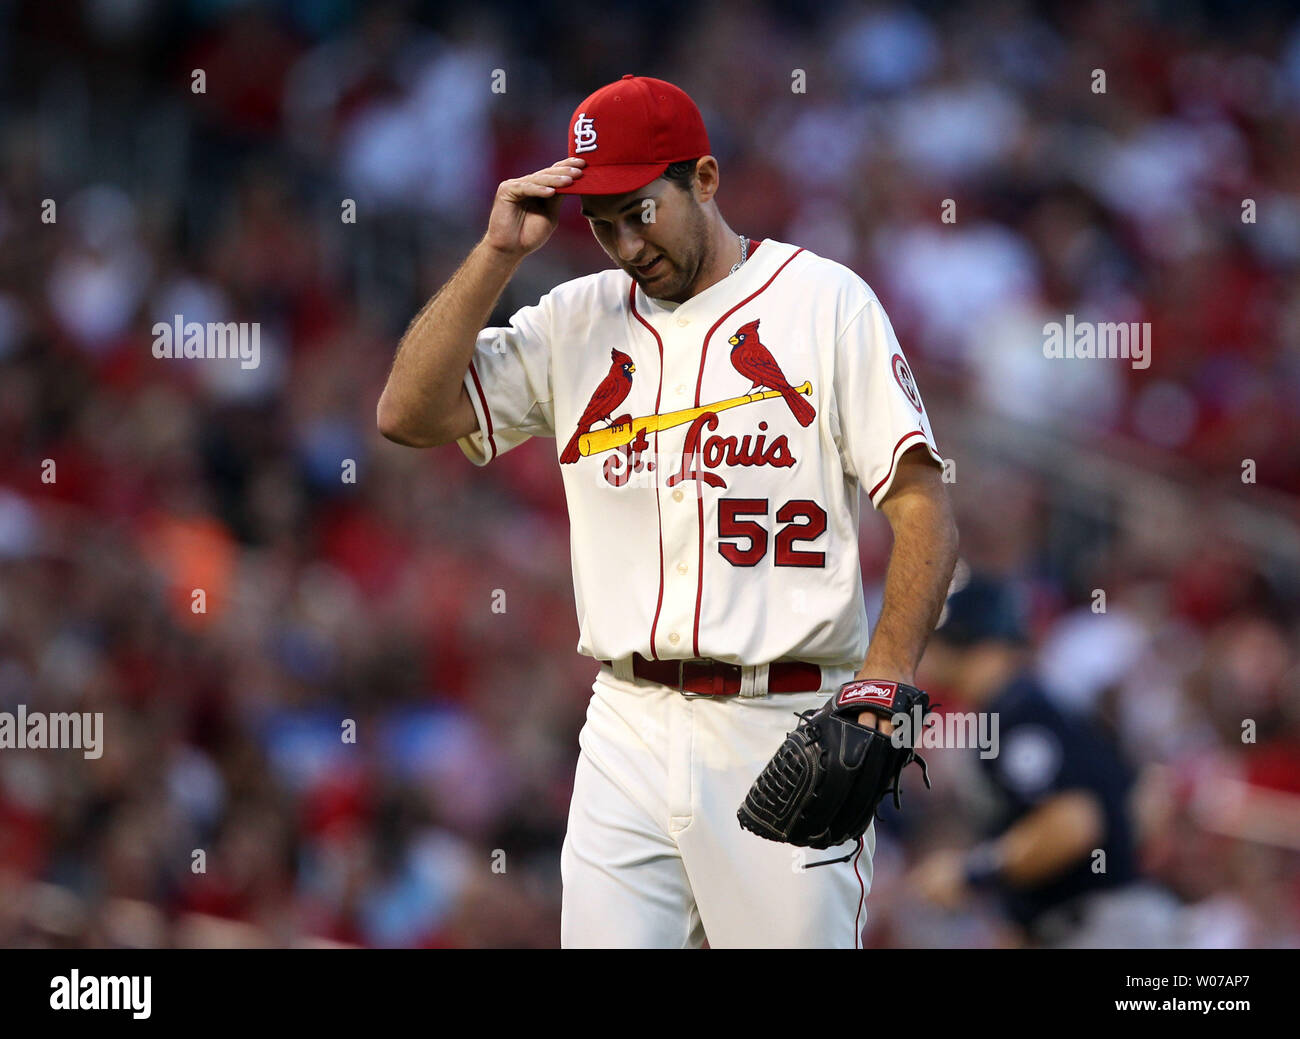 St. Louis Cardinals starting pitcher Michael Wacha adjusts his cap as he leaves the field in the fifth inning after giving up two runs to the Seattle Mariners at Busch Stadium in St. Louis on September 14, 2013.   UPI/Bill Greenblatt Stock Photo